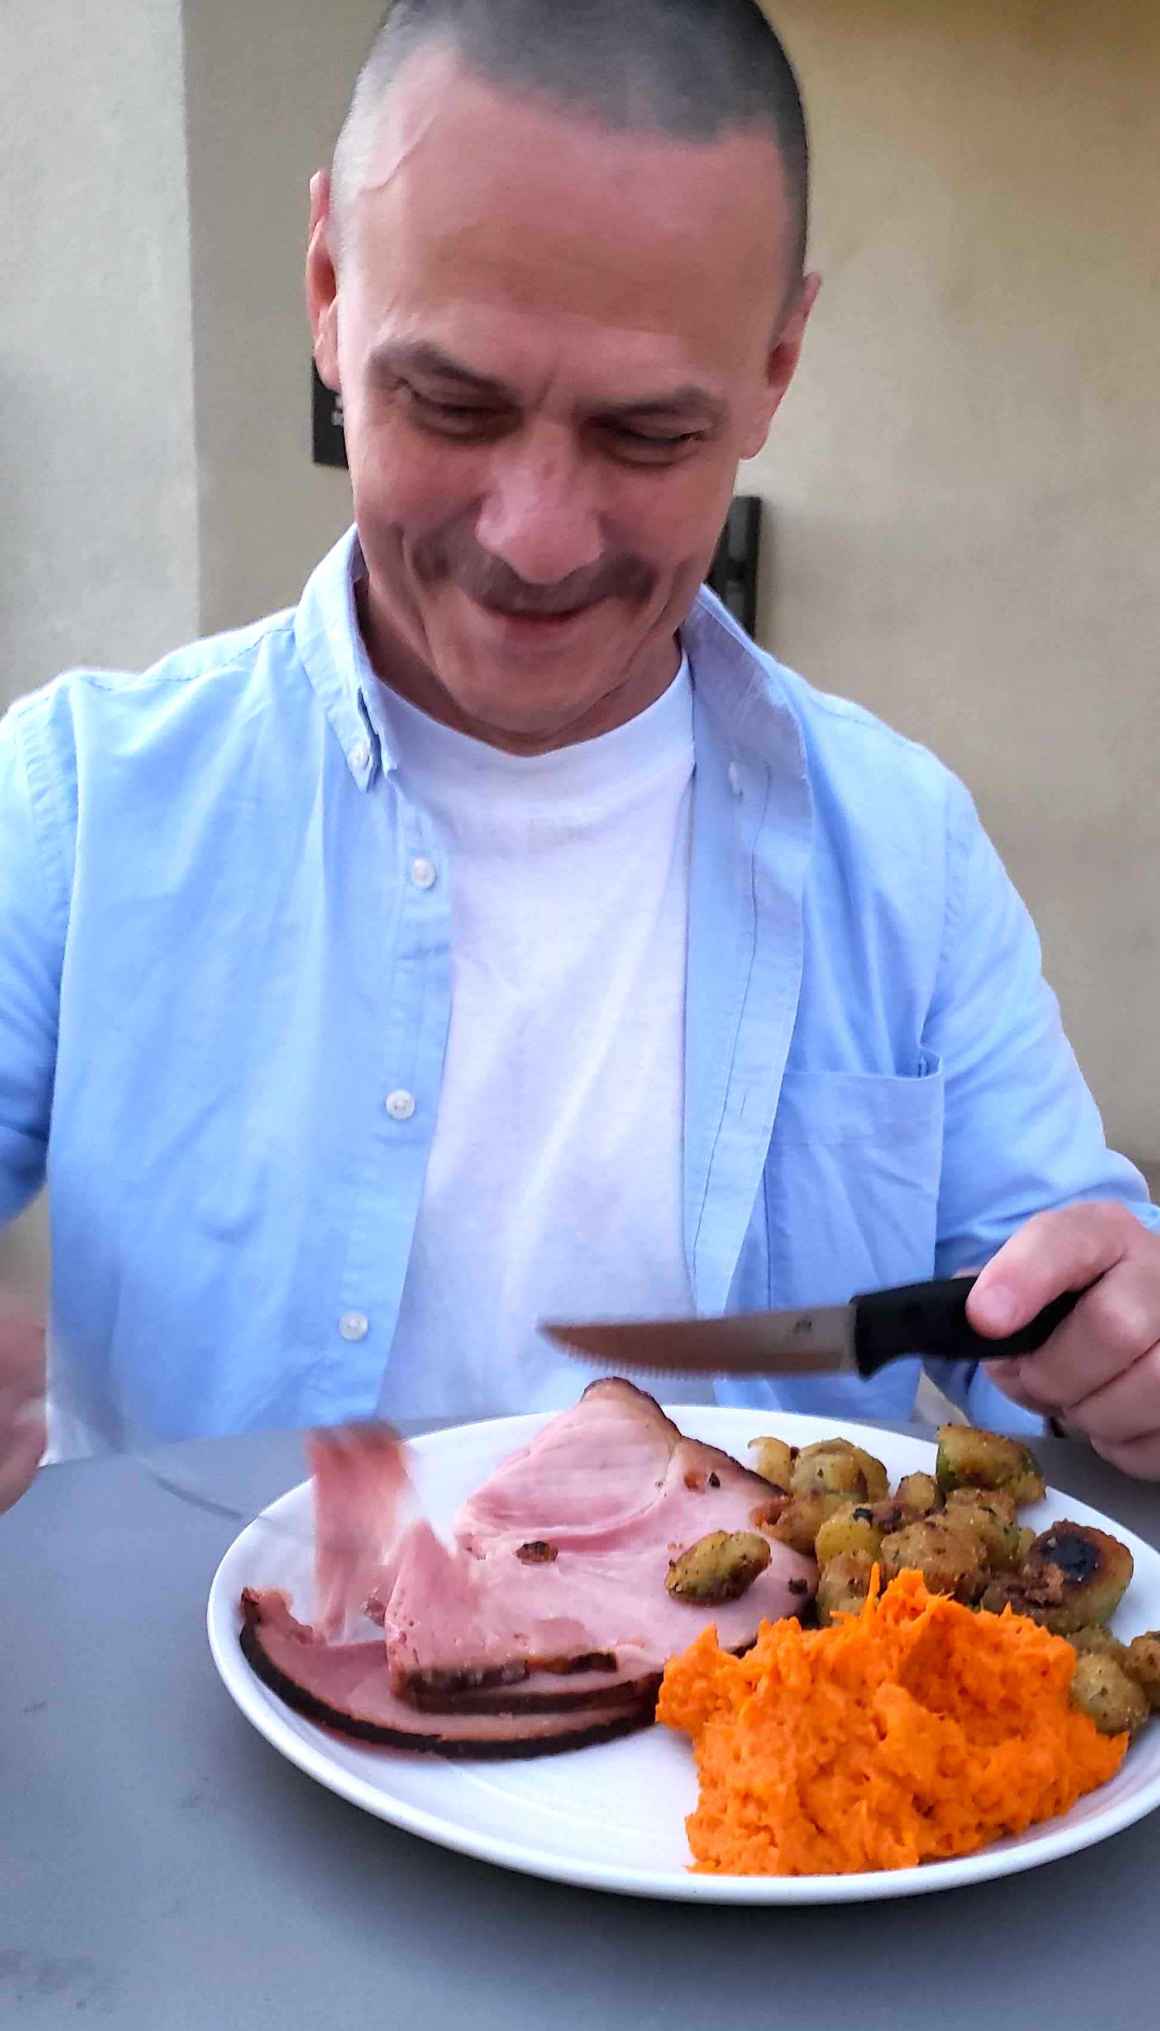 Shane Lassiter eating his first meal out of prison